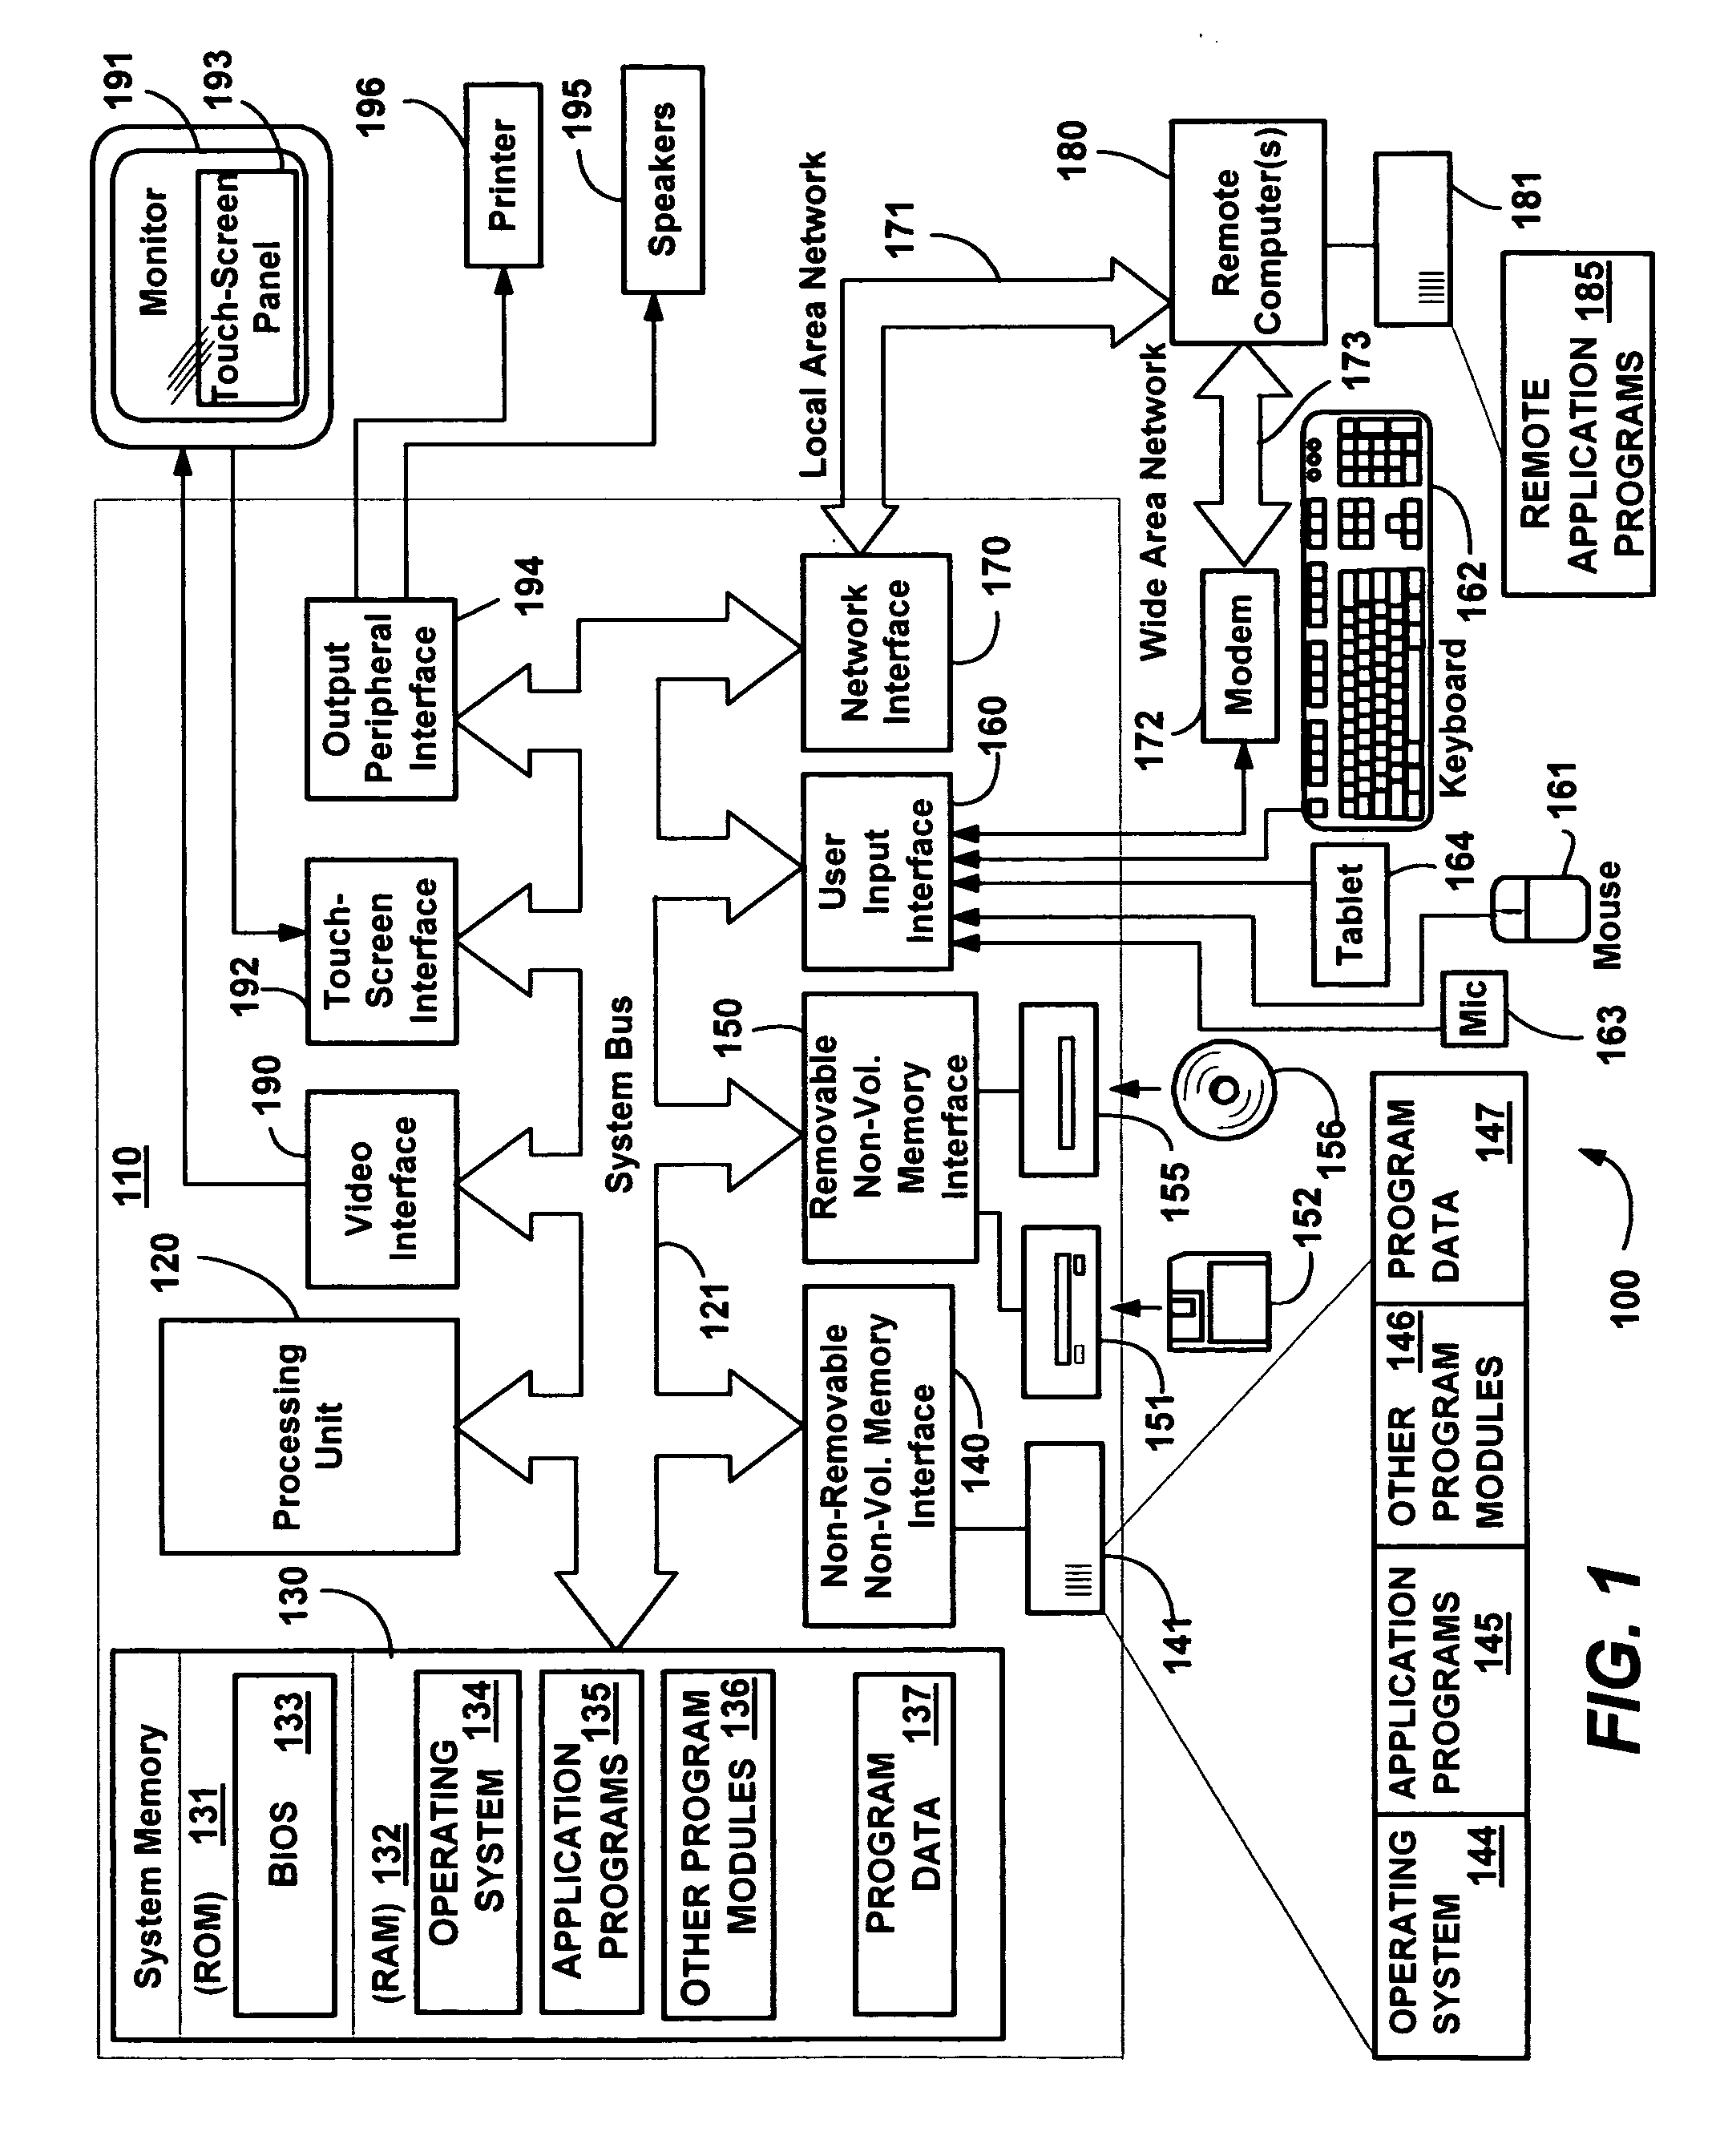 Method and system for computer application program task switching via a single hardware button